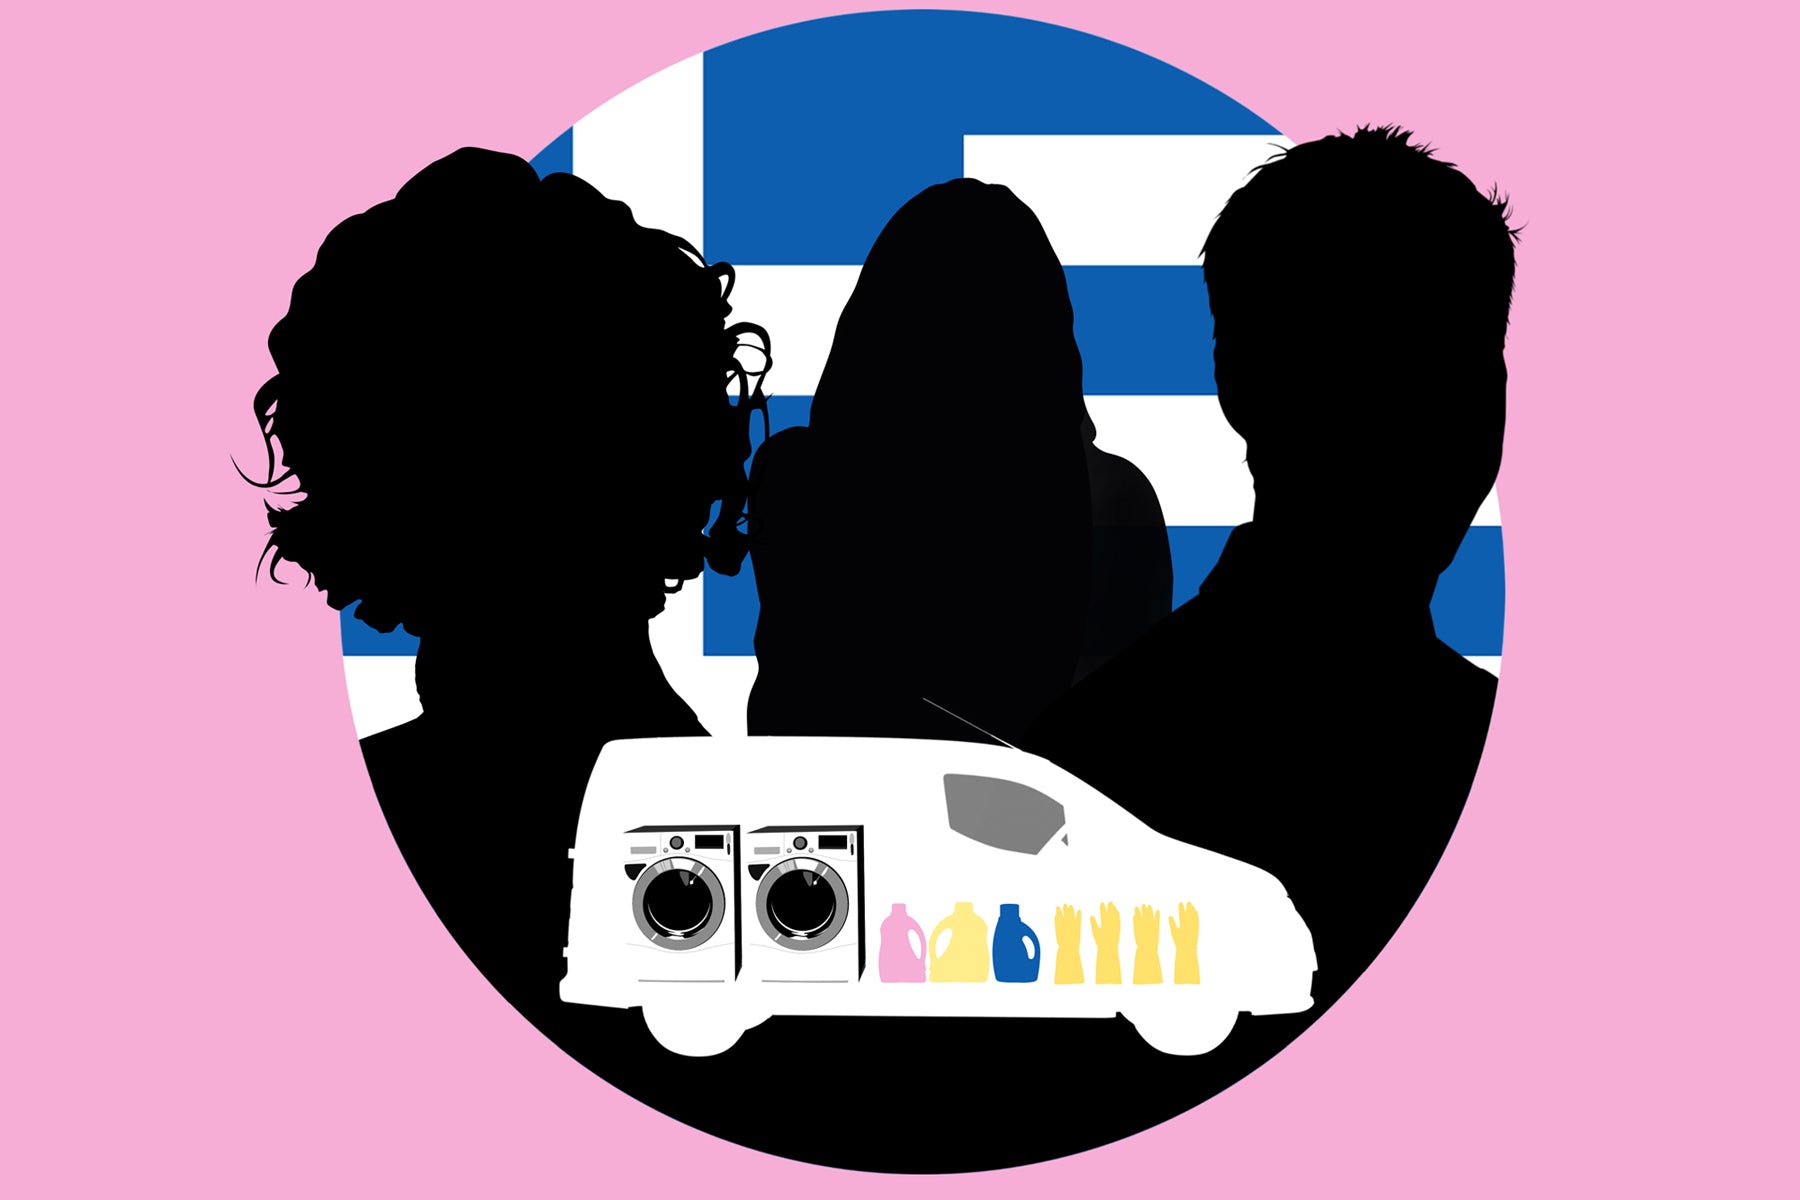 Illustration of three silhouetted figures against a round cut out of the Greek flag, above a white Ithaca Laundry van with washing machines and supplies.